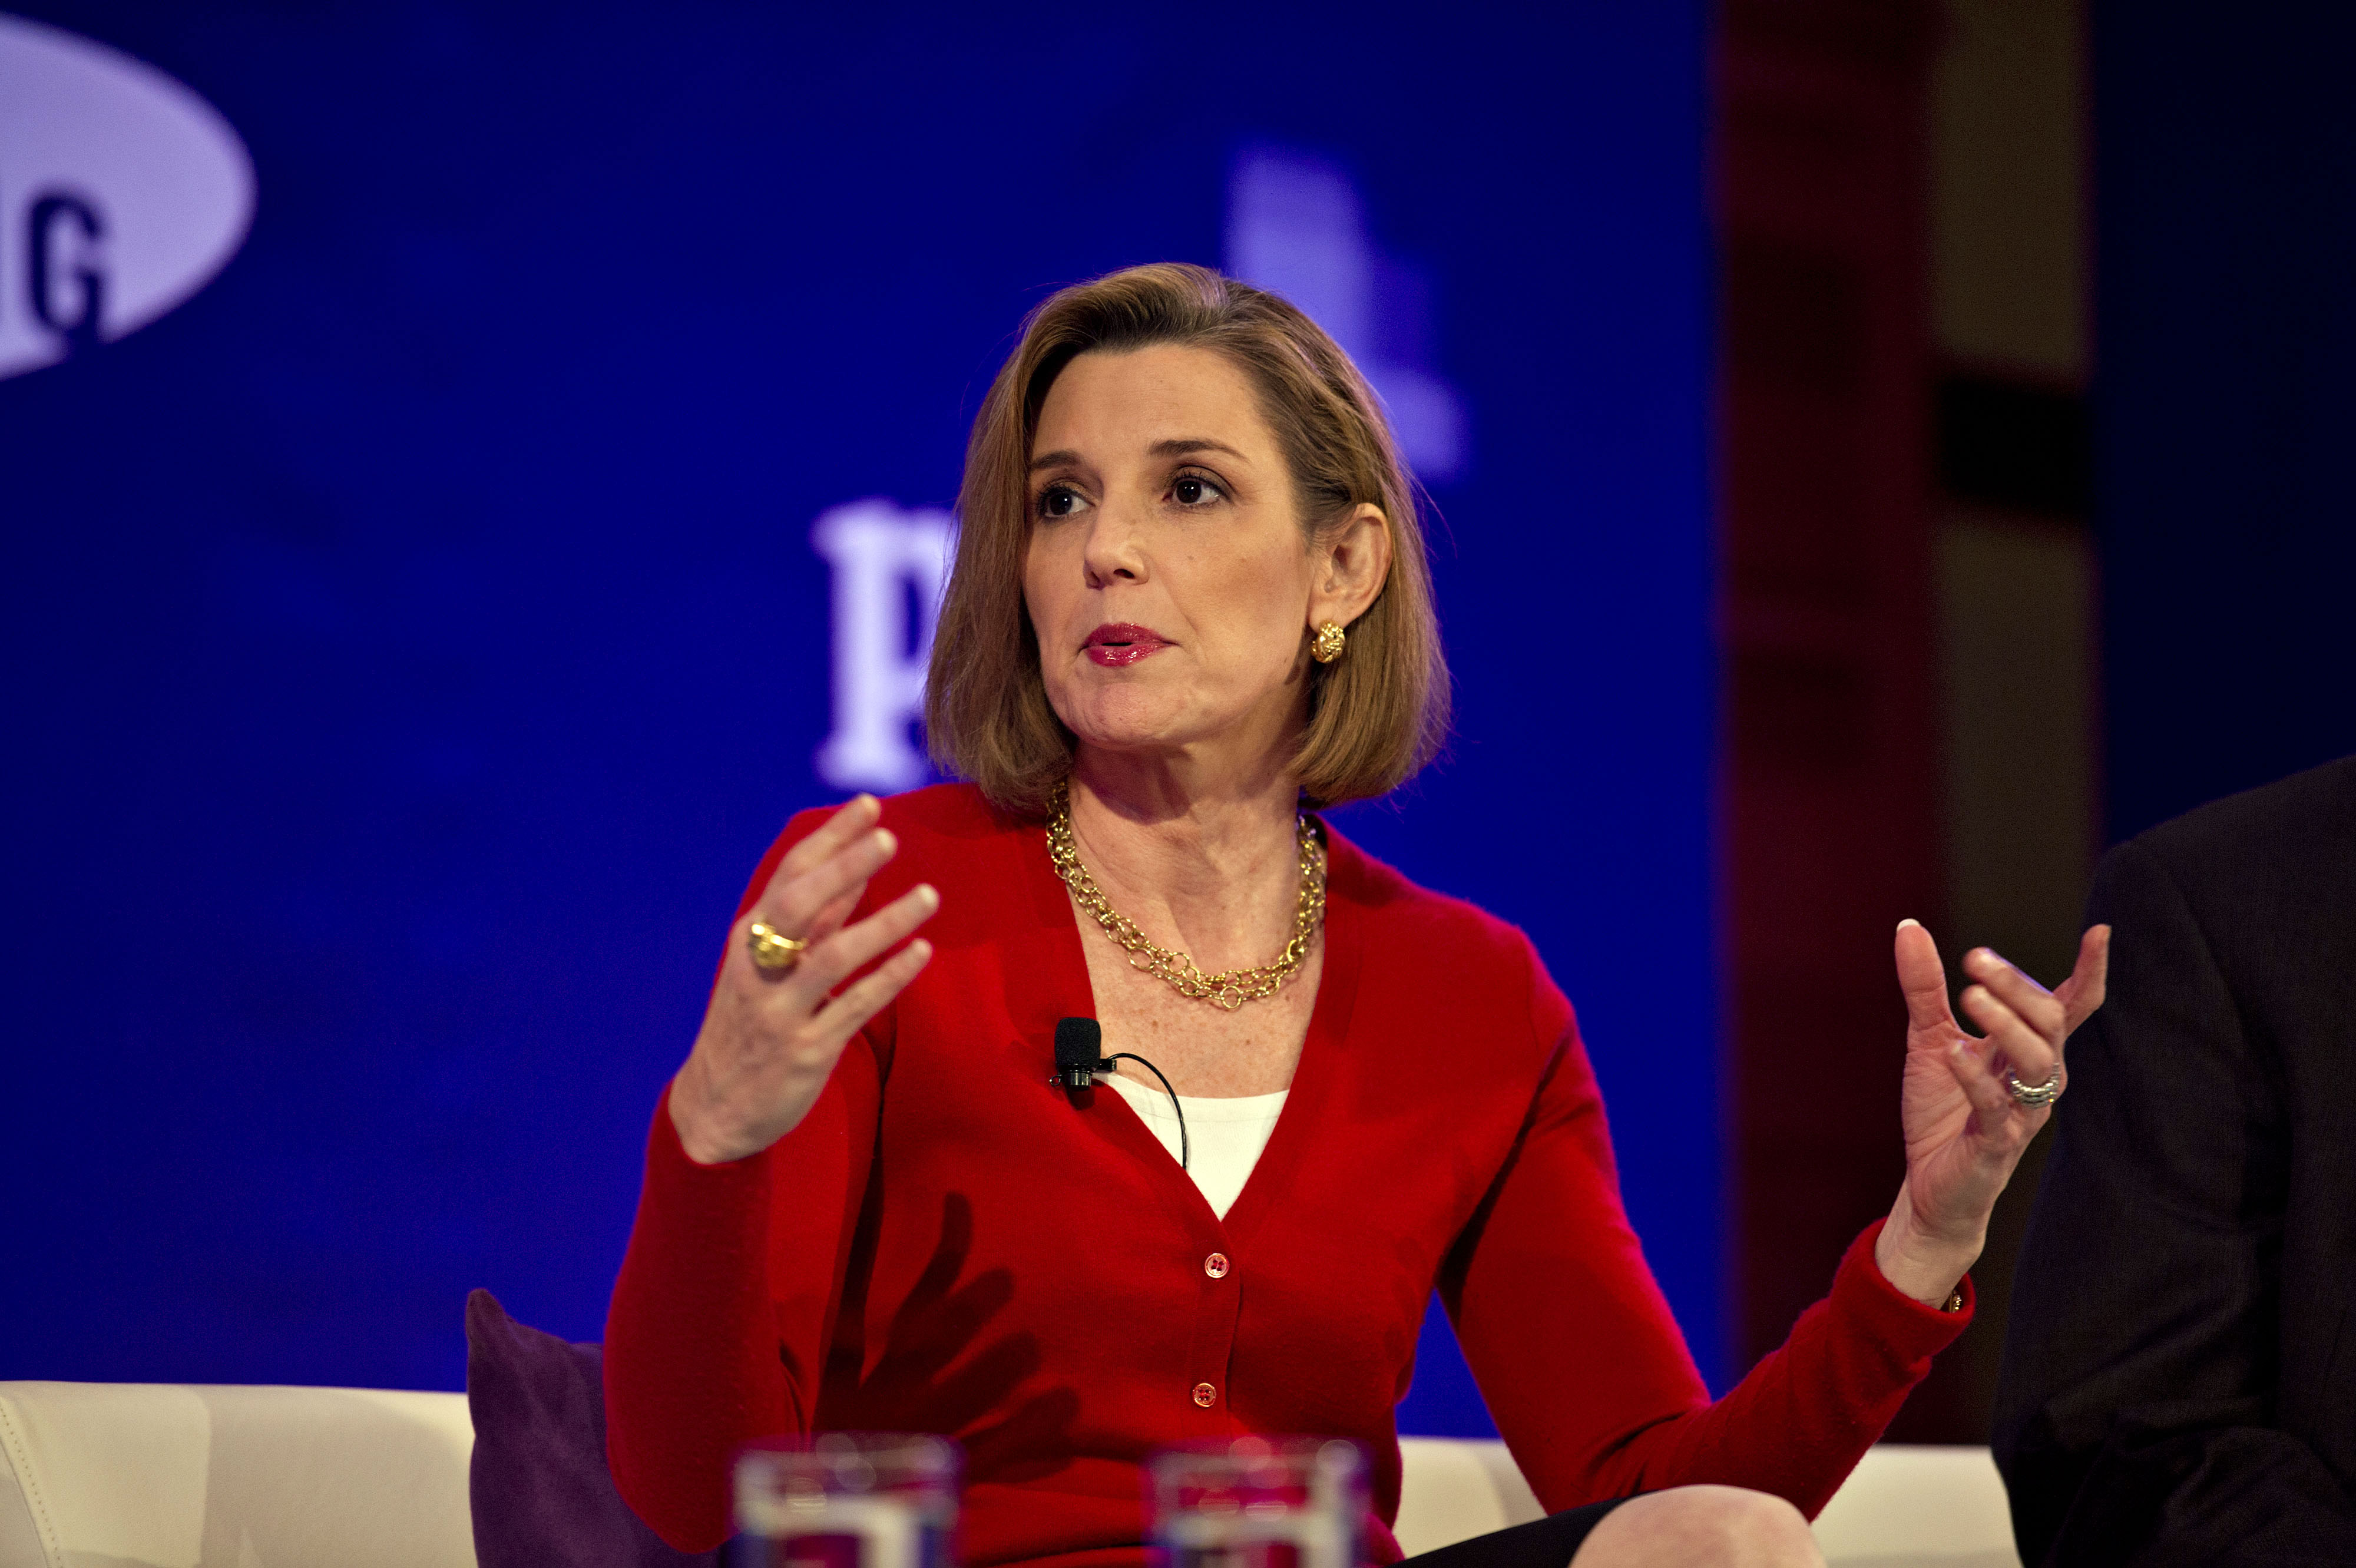 Sallie Krawcheck, owner of Ellevate Network, speaks at the Bloomberg Year Ahead: 2014 conference in Chicago, Illinois, U.S., on Wednesday, Nov. 20, 2013. (Bloomberg/Getty Images)